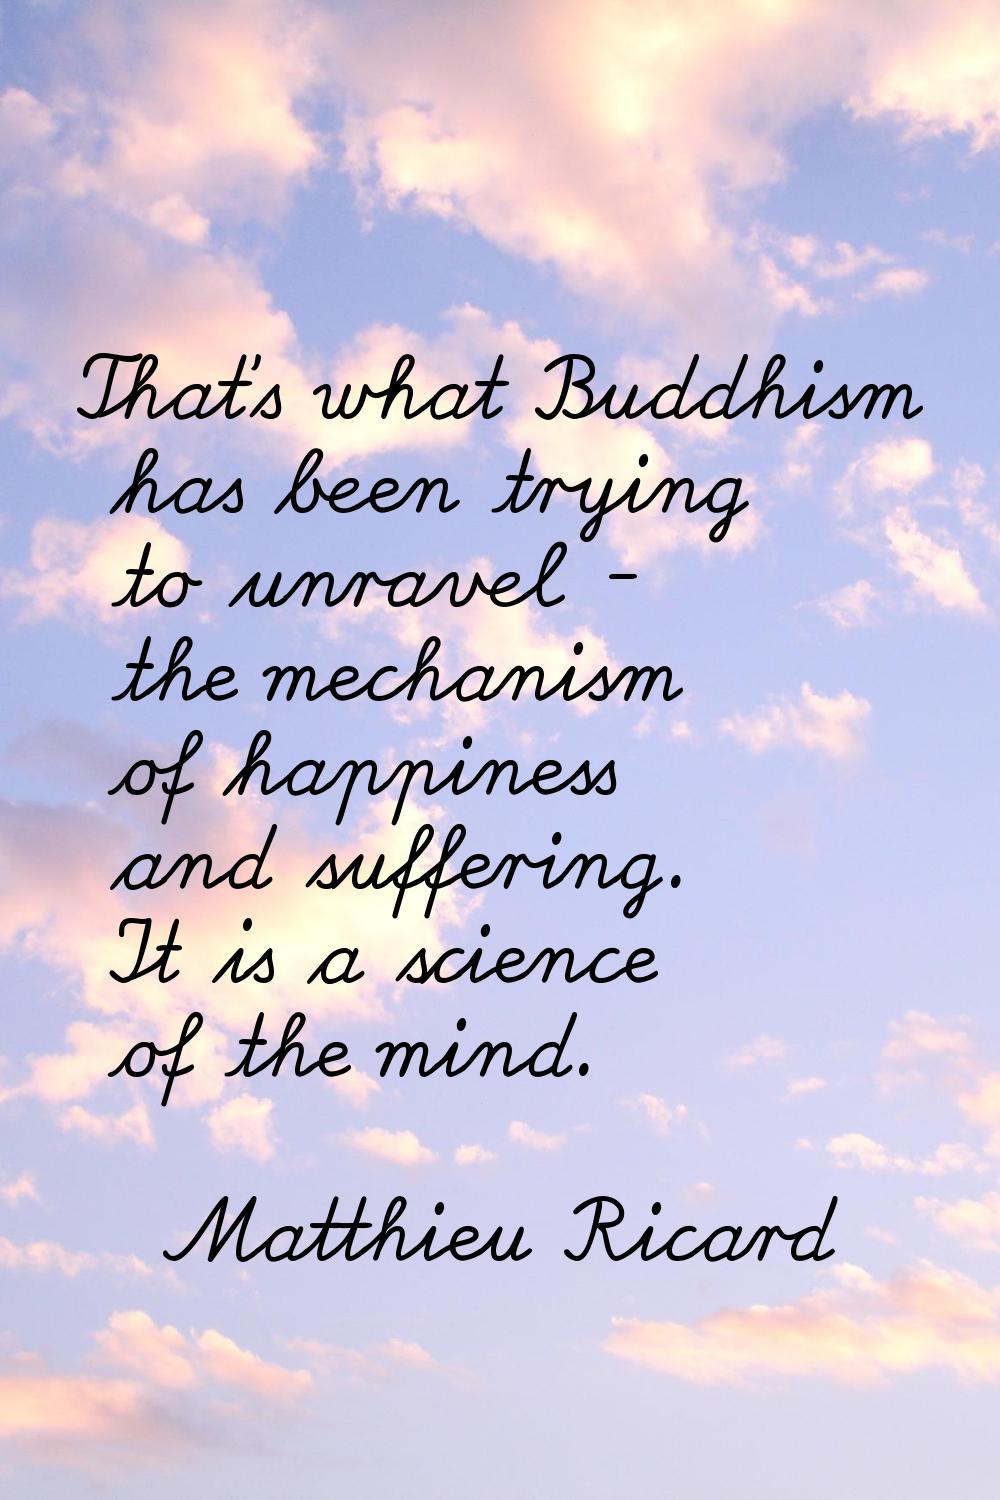 That's what Buddhism has been trying to unravel - the mechanism of happiness and suffering. It is a